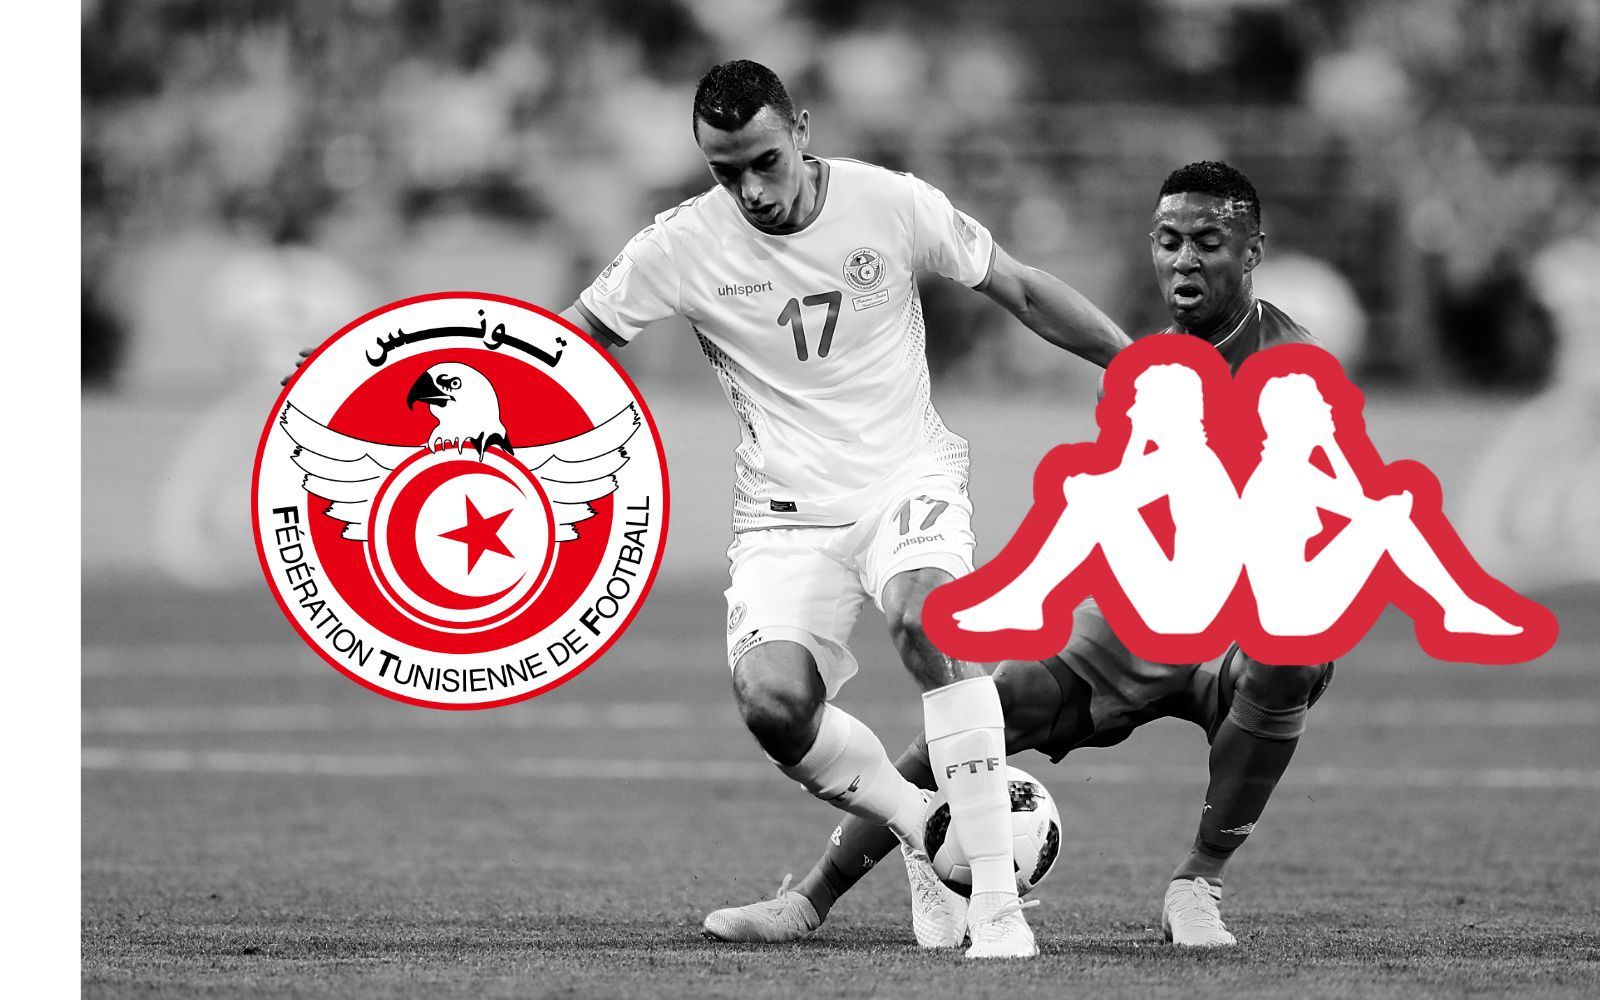 zweer terugvallen Bourgeon Kappa become the new Tunisia official kit supplier